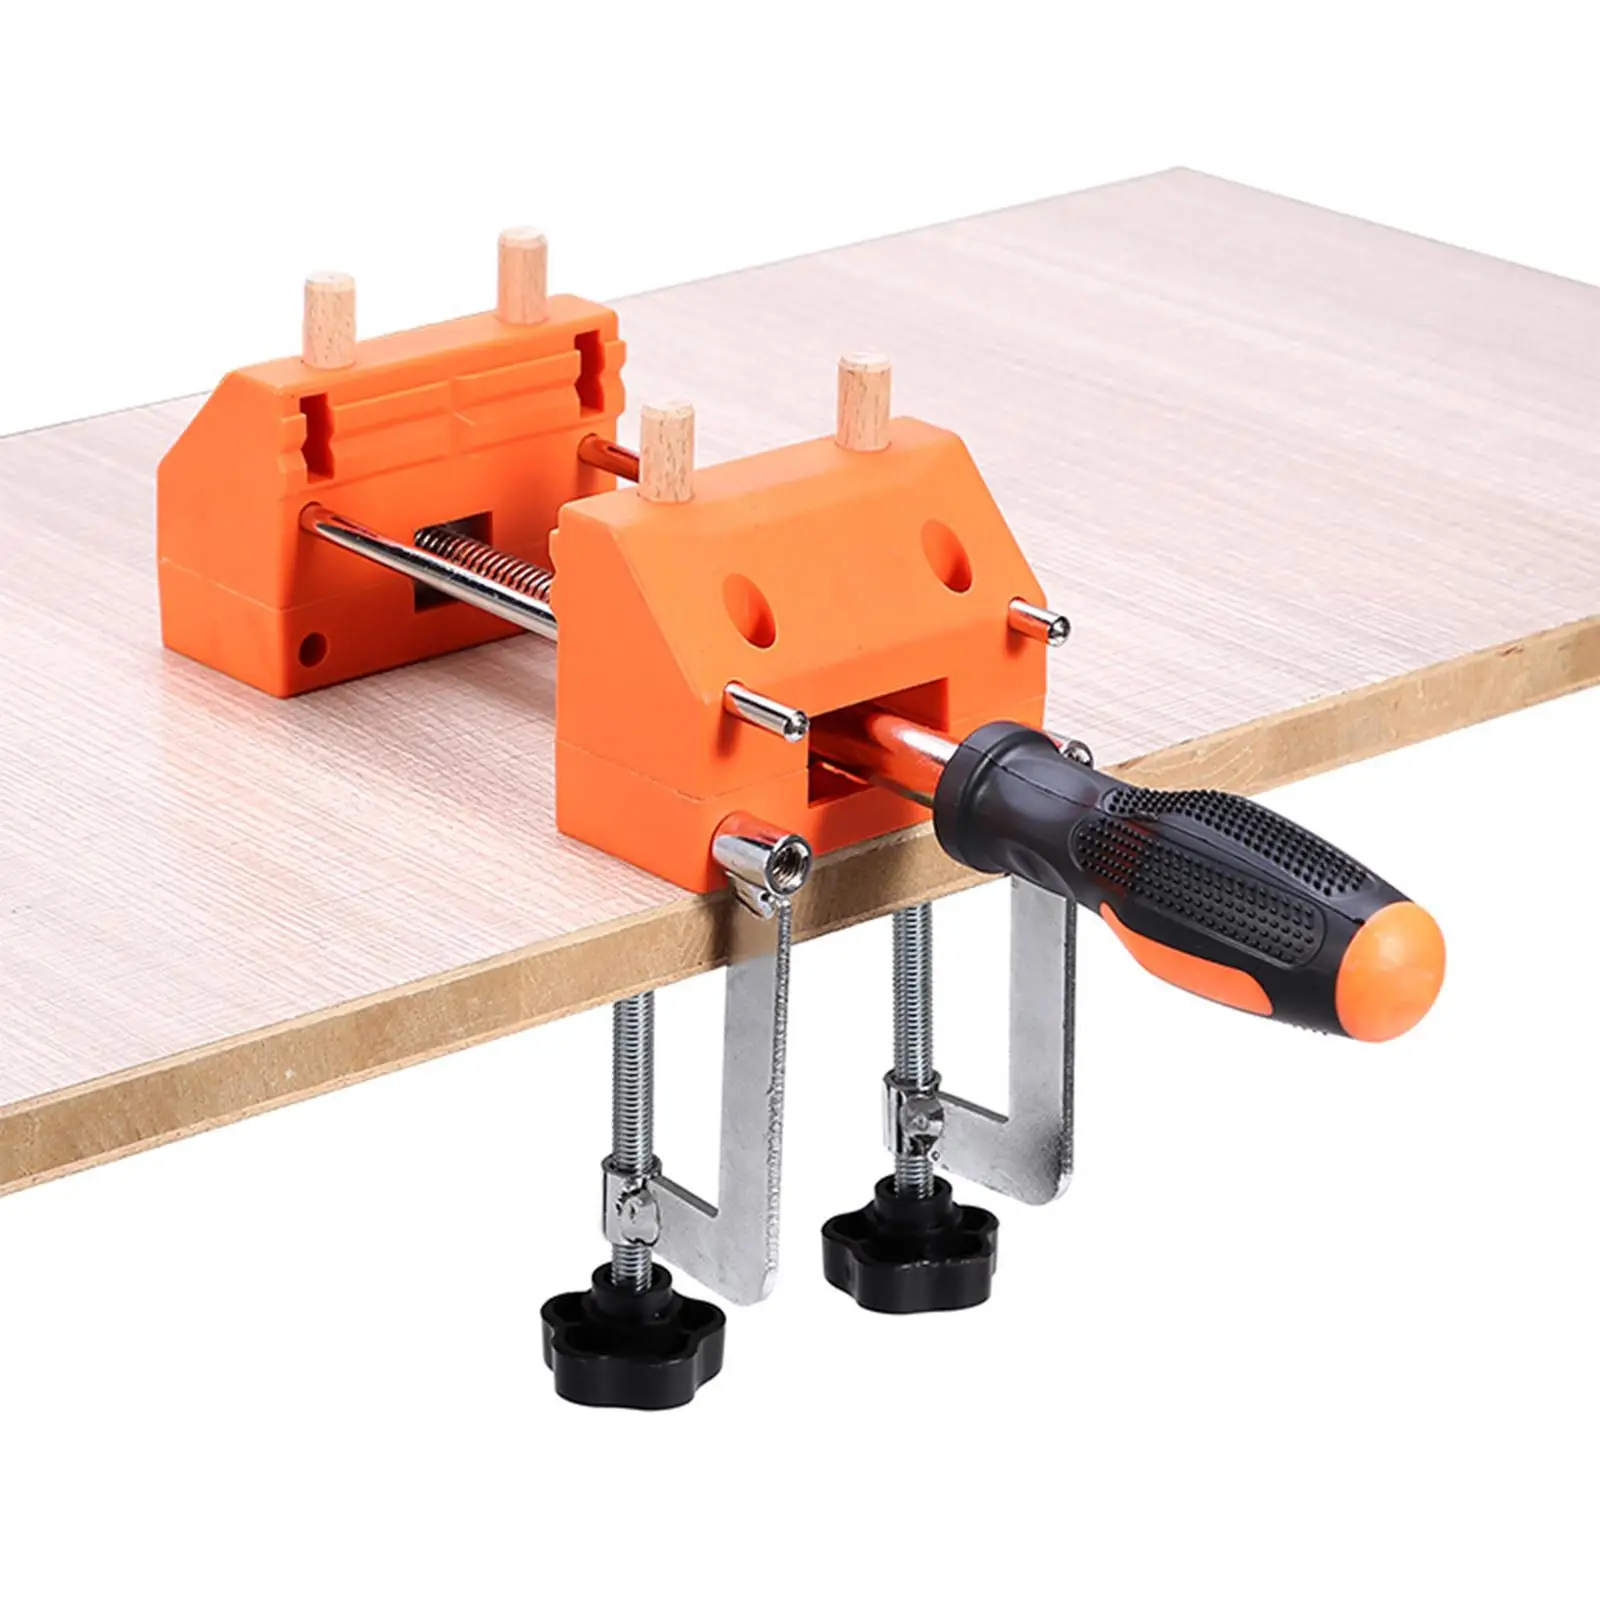 

Woodworking Bench Vise Kit Heavy Duty Portable Home Vice Repair Tool for Woodworking Studios Home Teaching Equipment Accessories